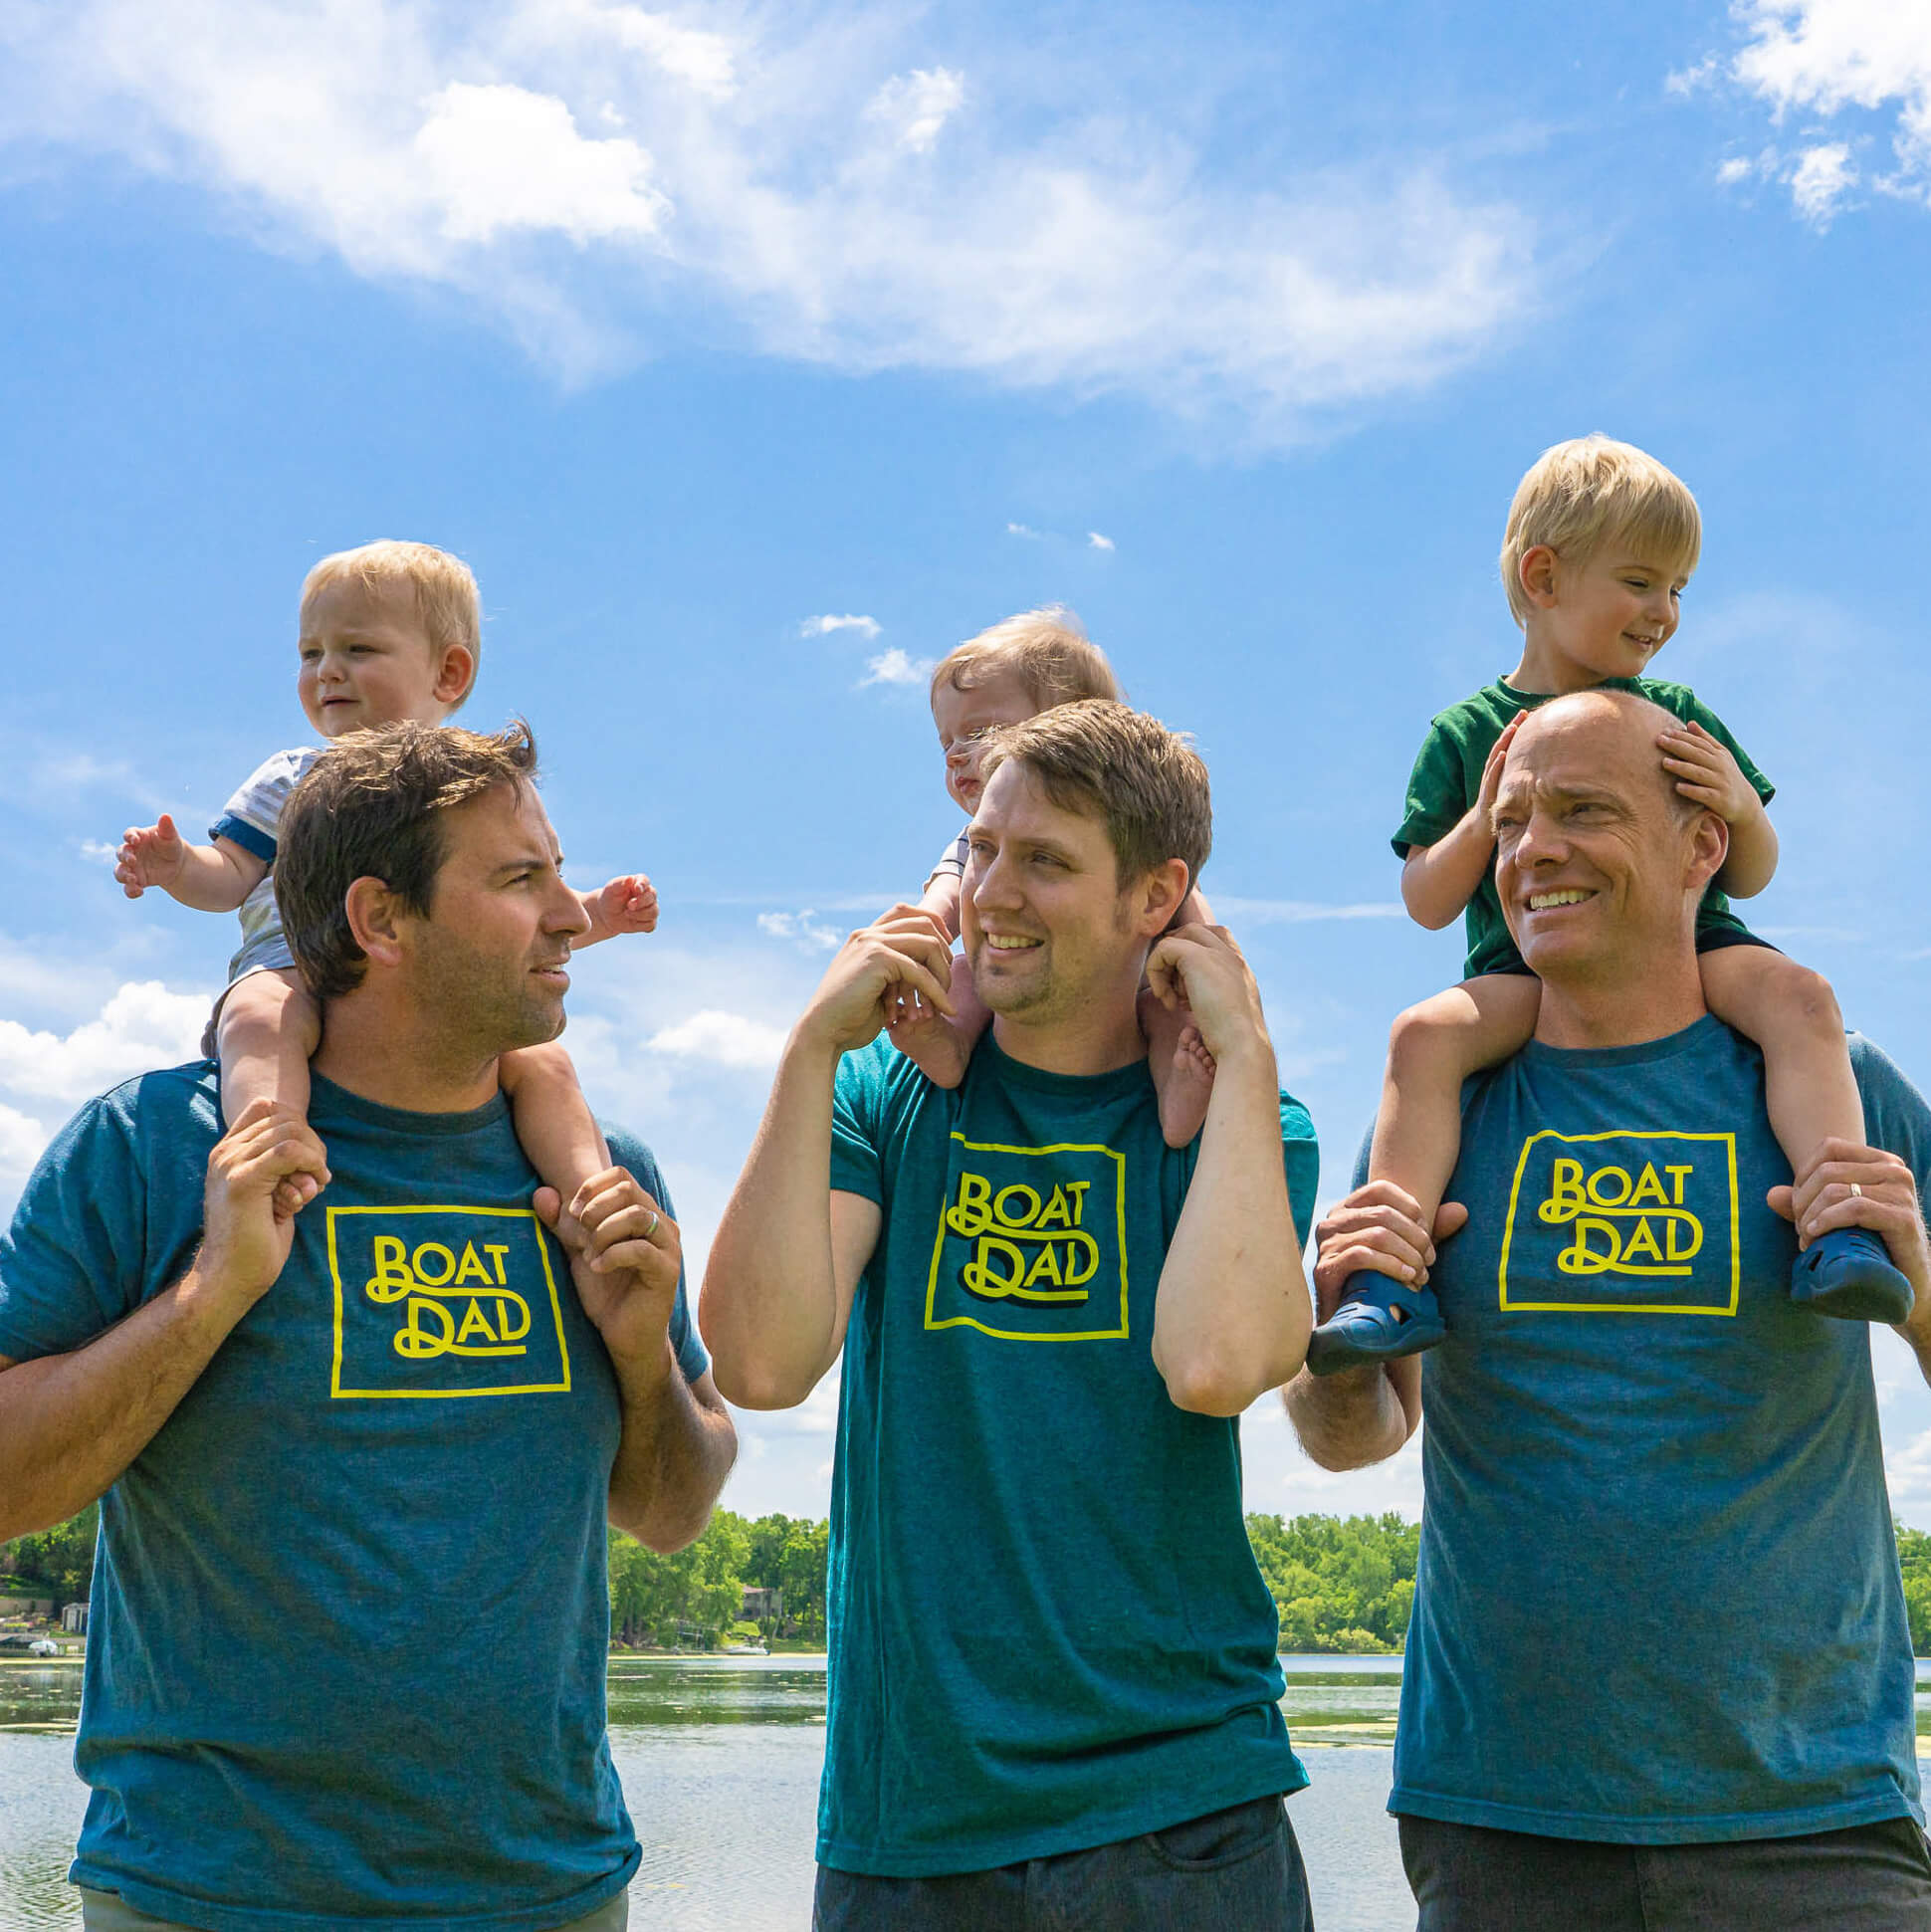 fathers wearing boat dad shirts while holding kids on shoulders